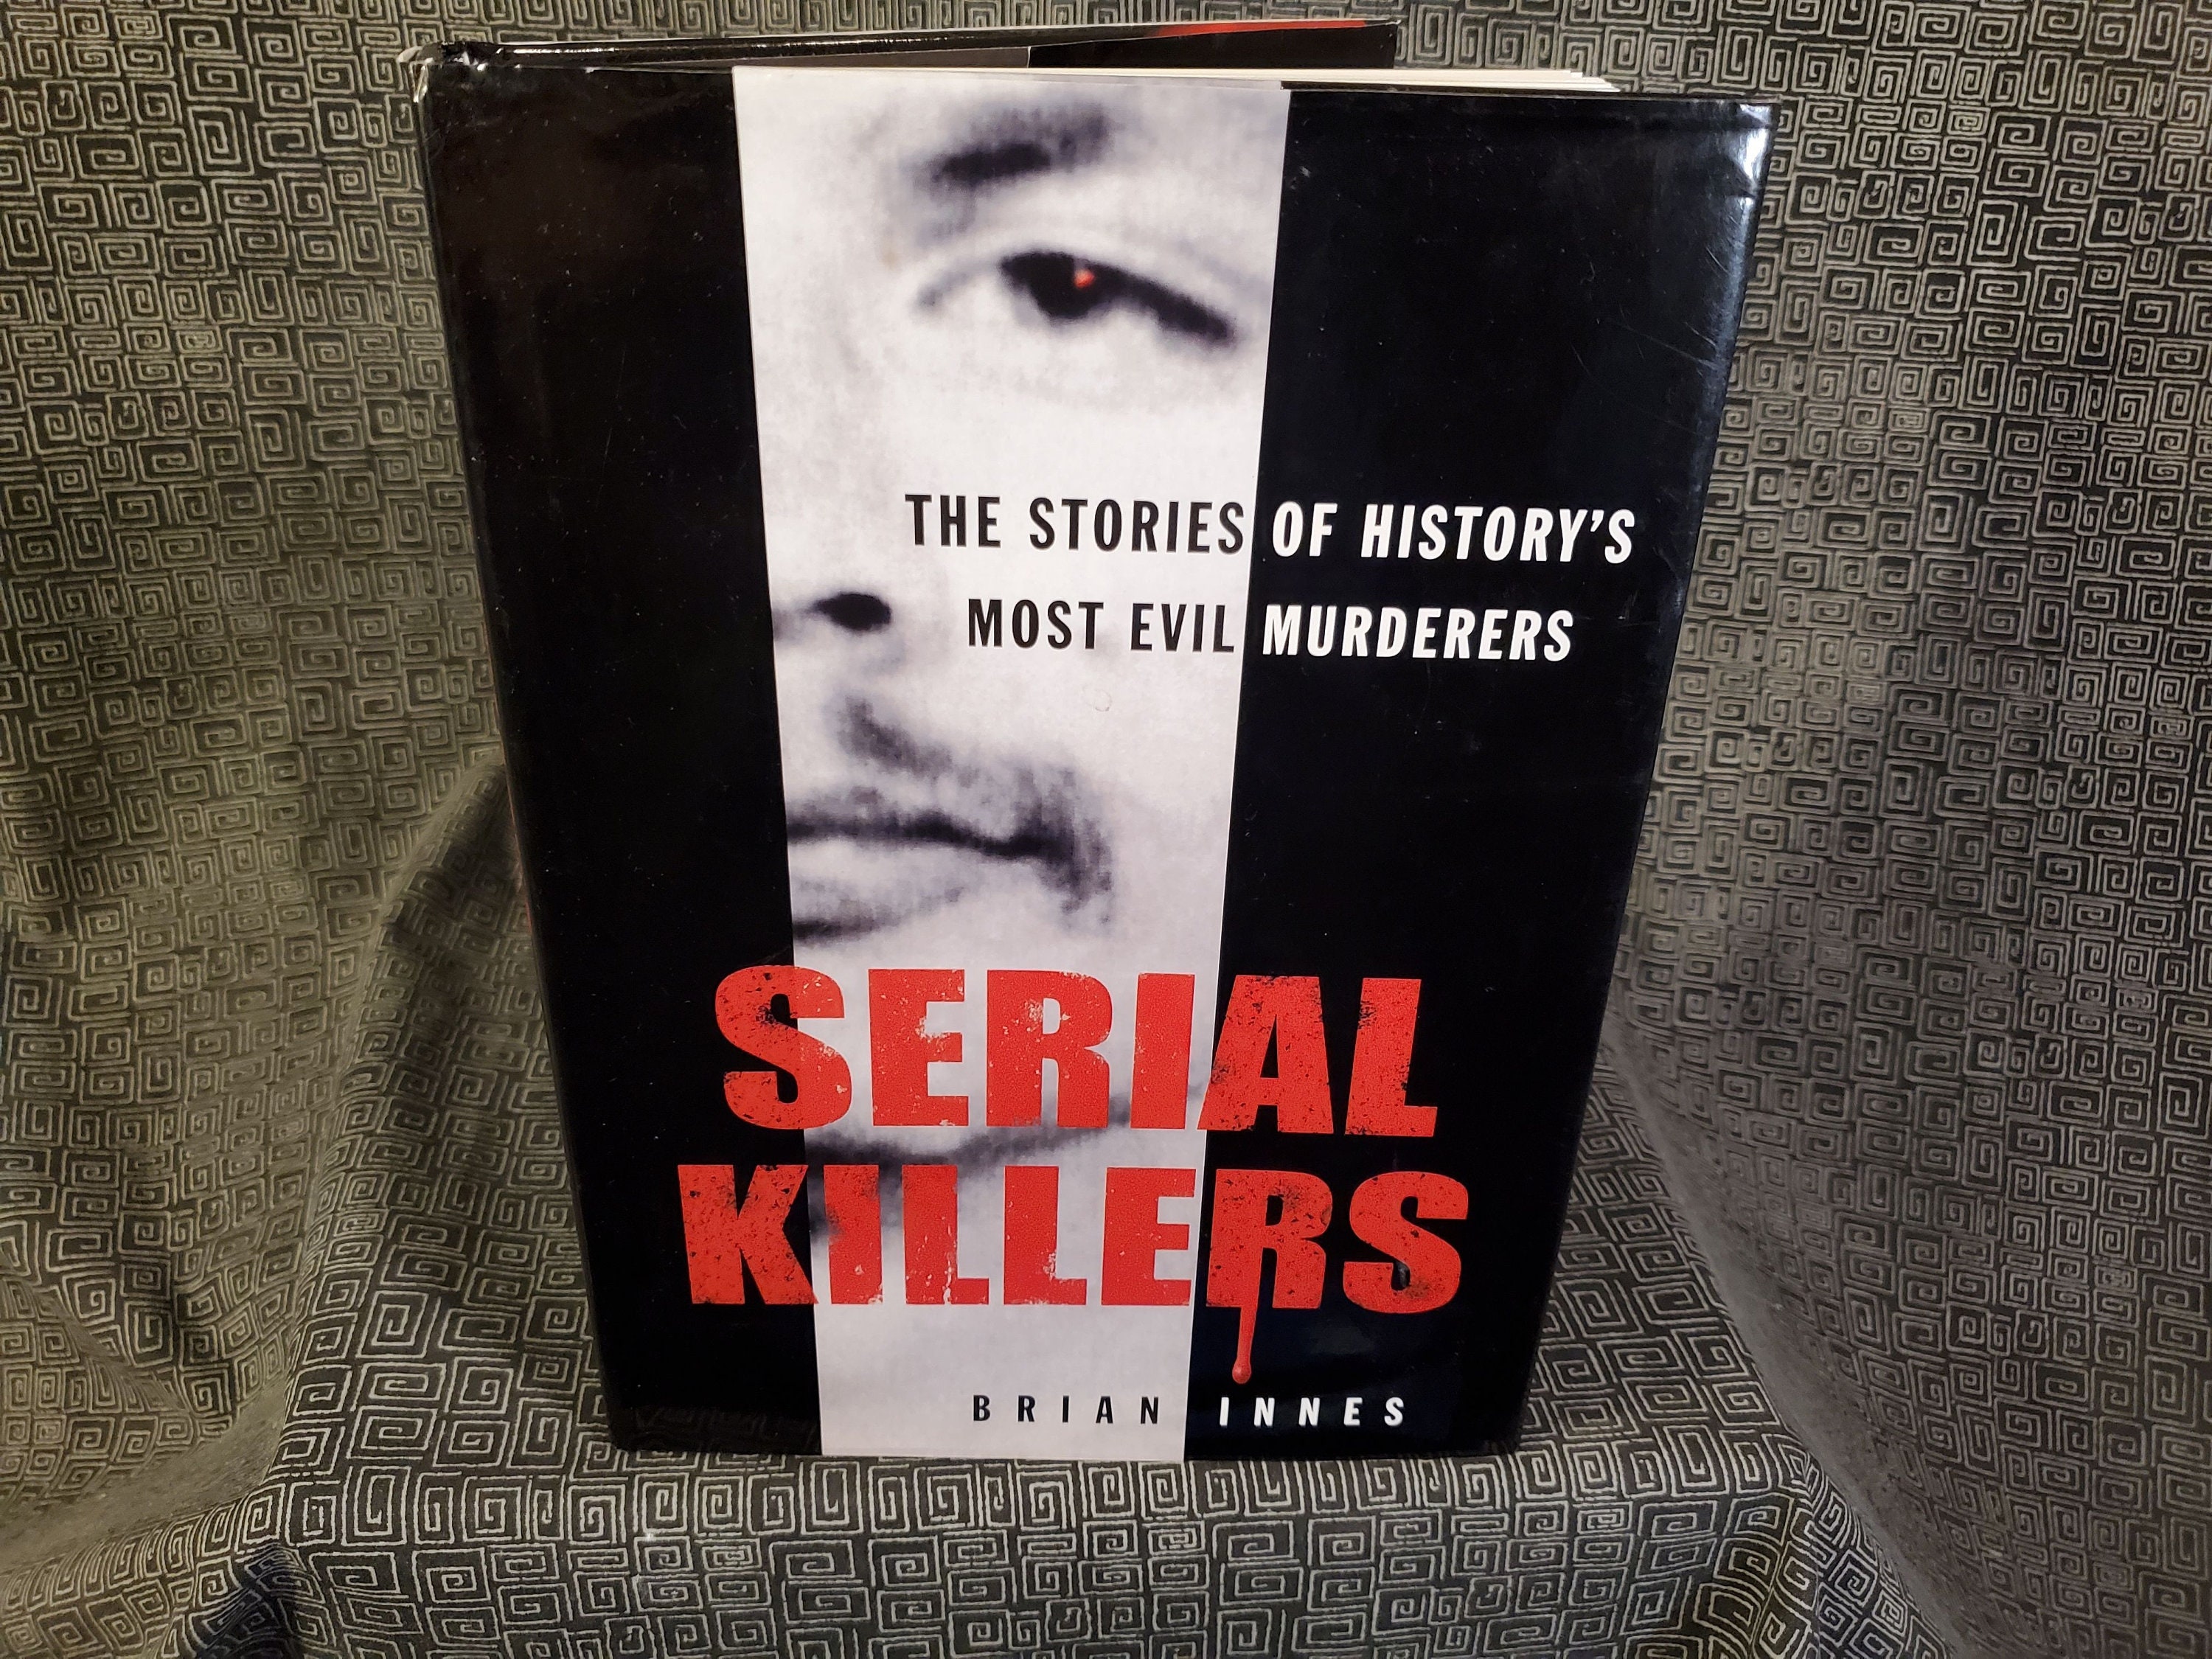 SERIAL KILLERS- BRIAN INNES-THE STORIES OF HISTORY'S MOST EVIL